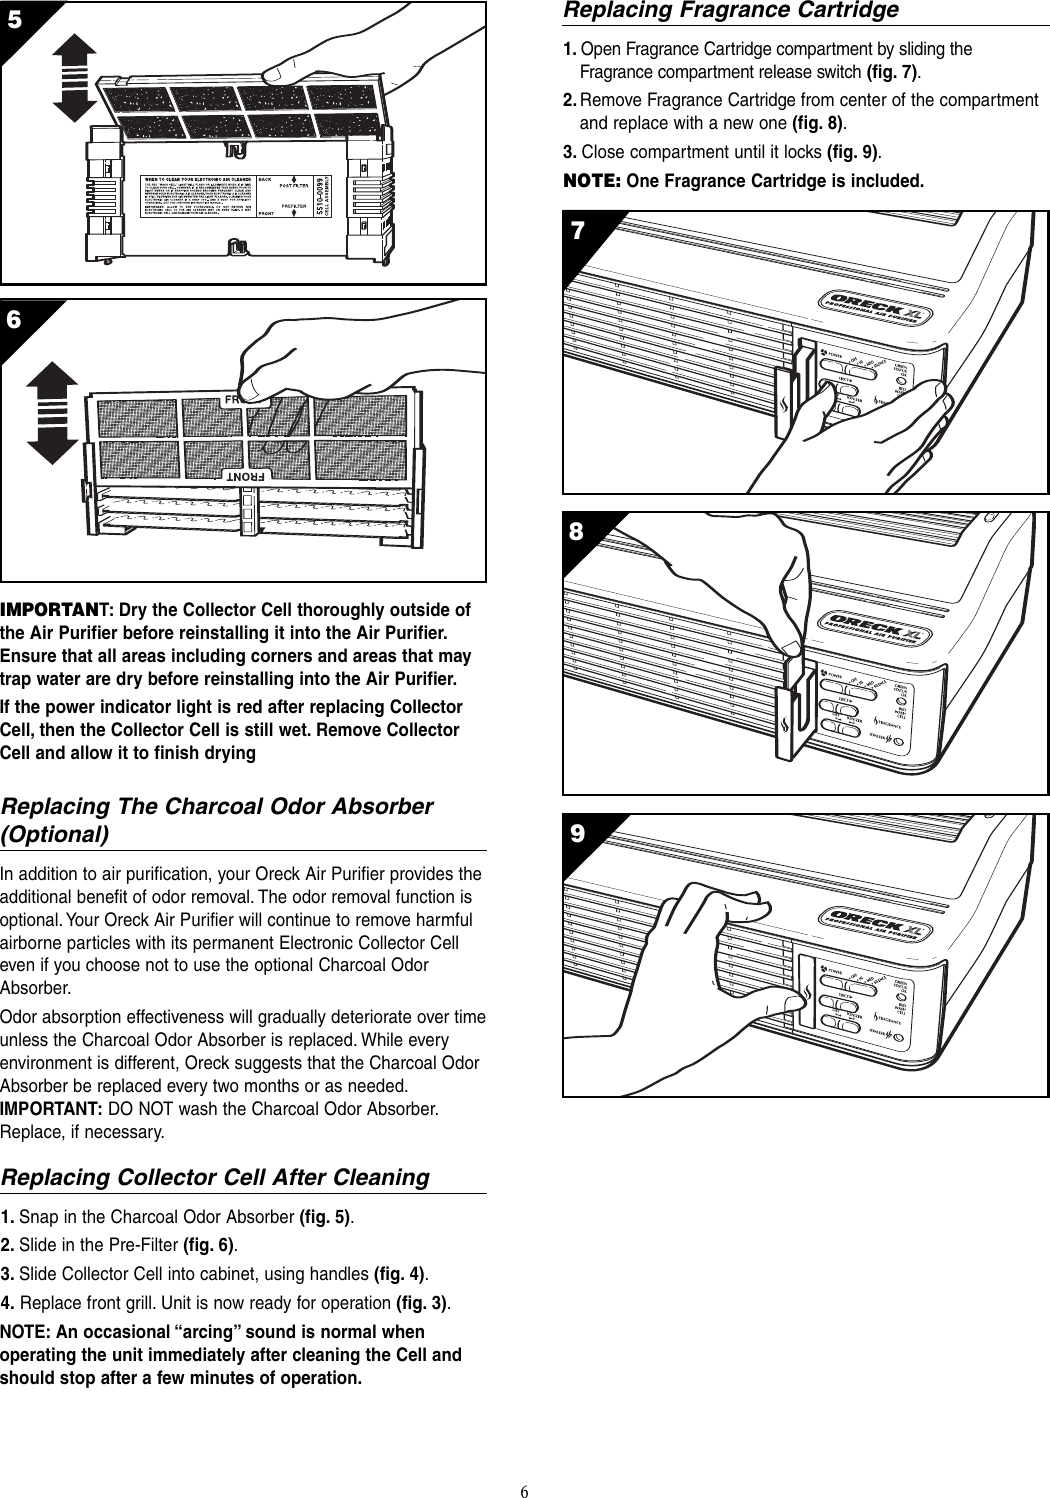 Page 8 of 12 - Oreck Oreck-3323-8889Revk-Users-Manual- Air 8 Manual Rev B  Oreck-3323-8889revk-users-manual